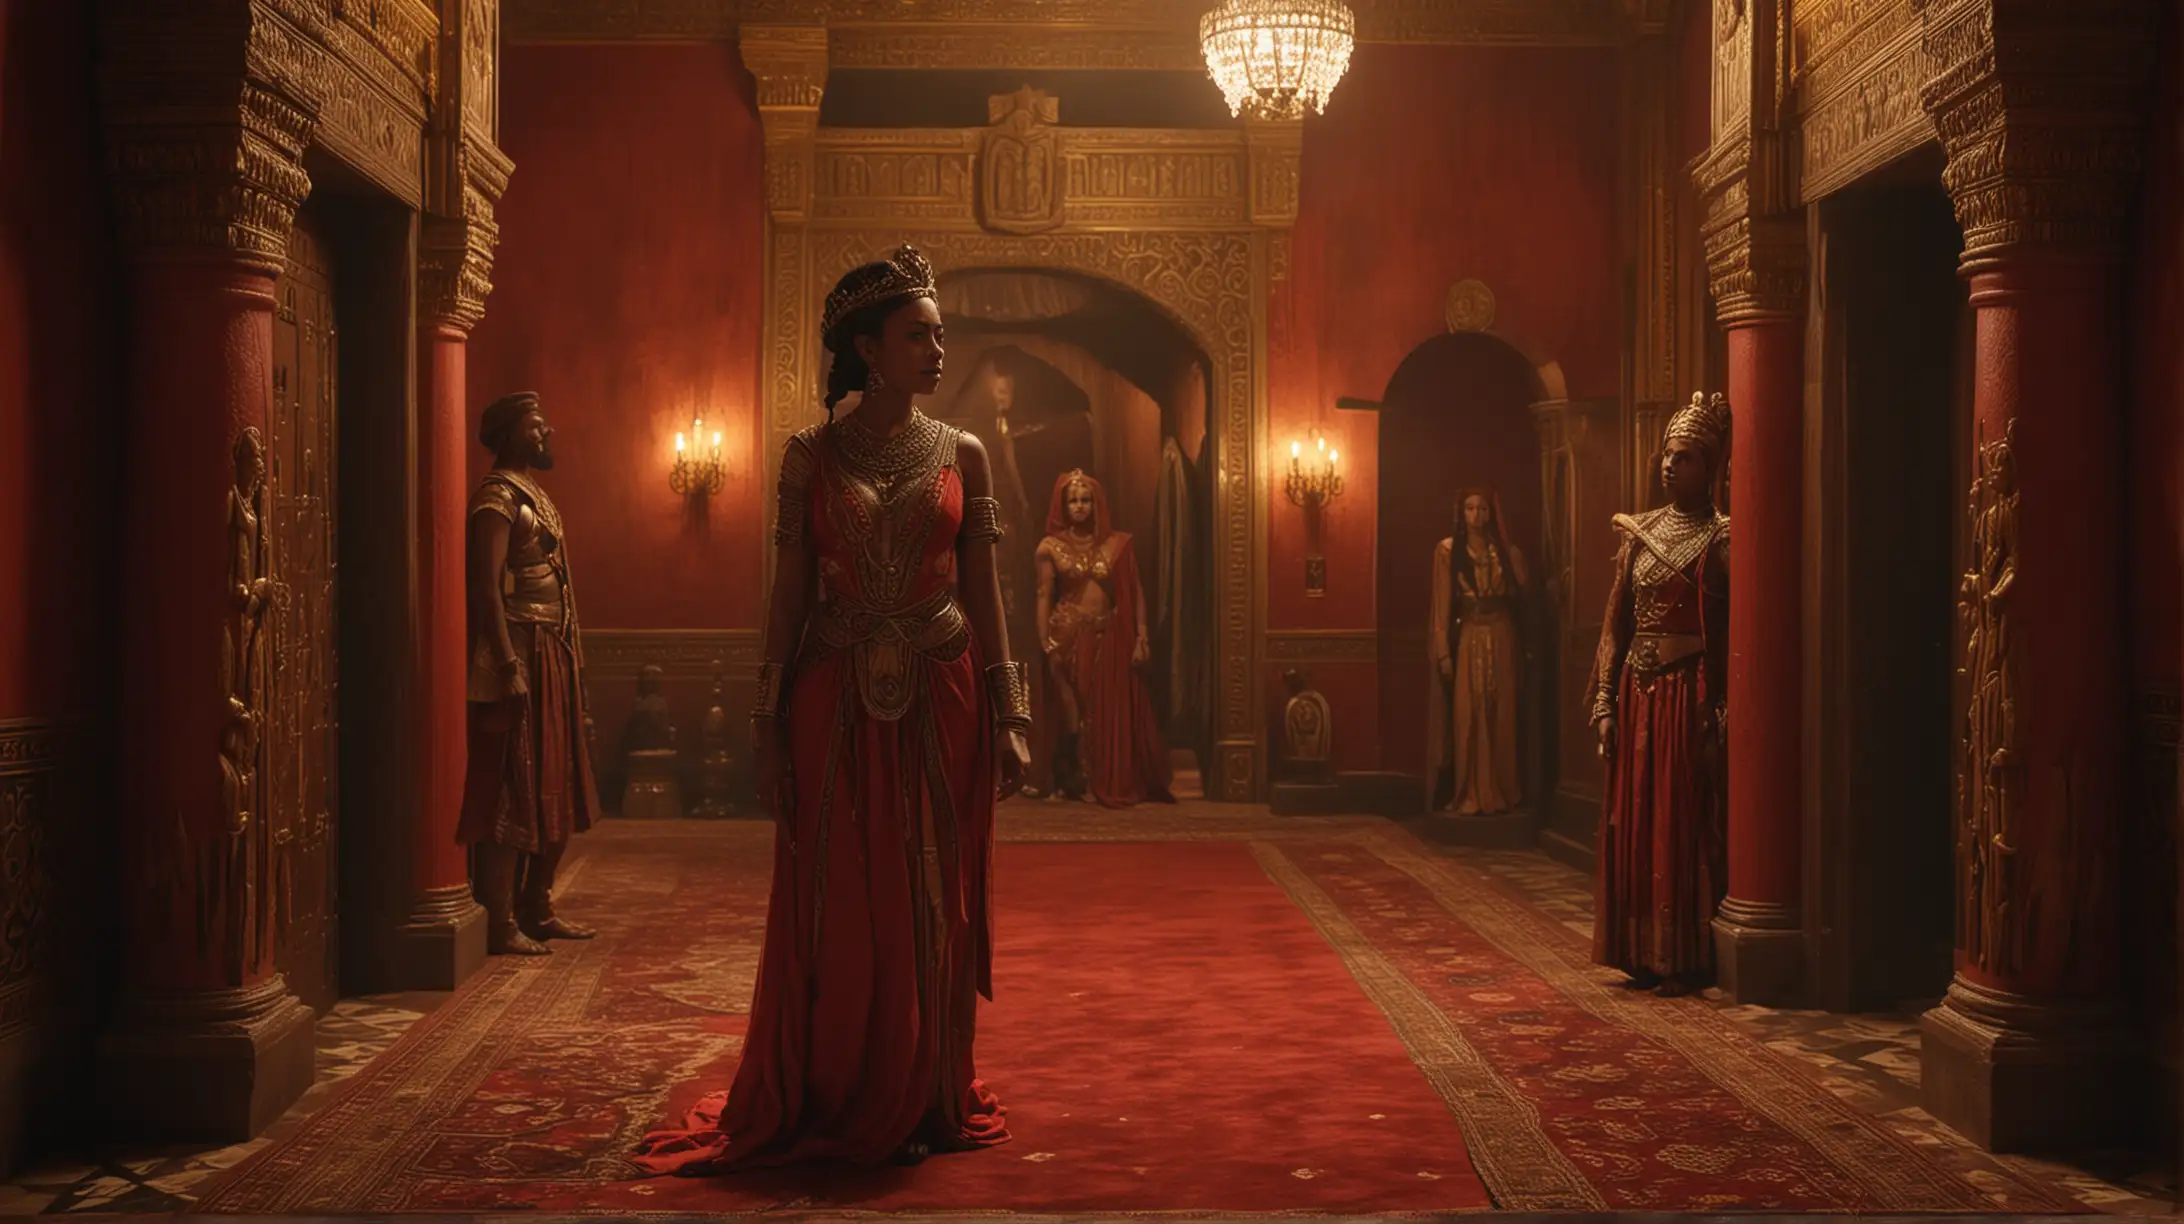 Queen of Sheba and King Solomon Enter Royal Chambers in Dim Red and Gold Environment